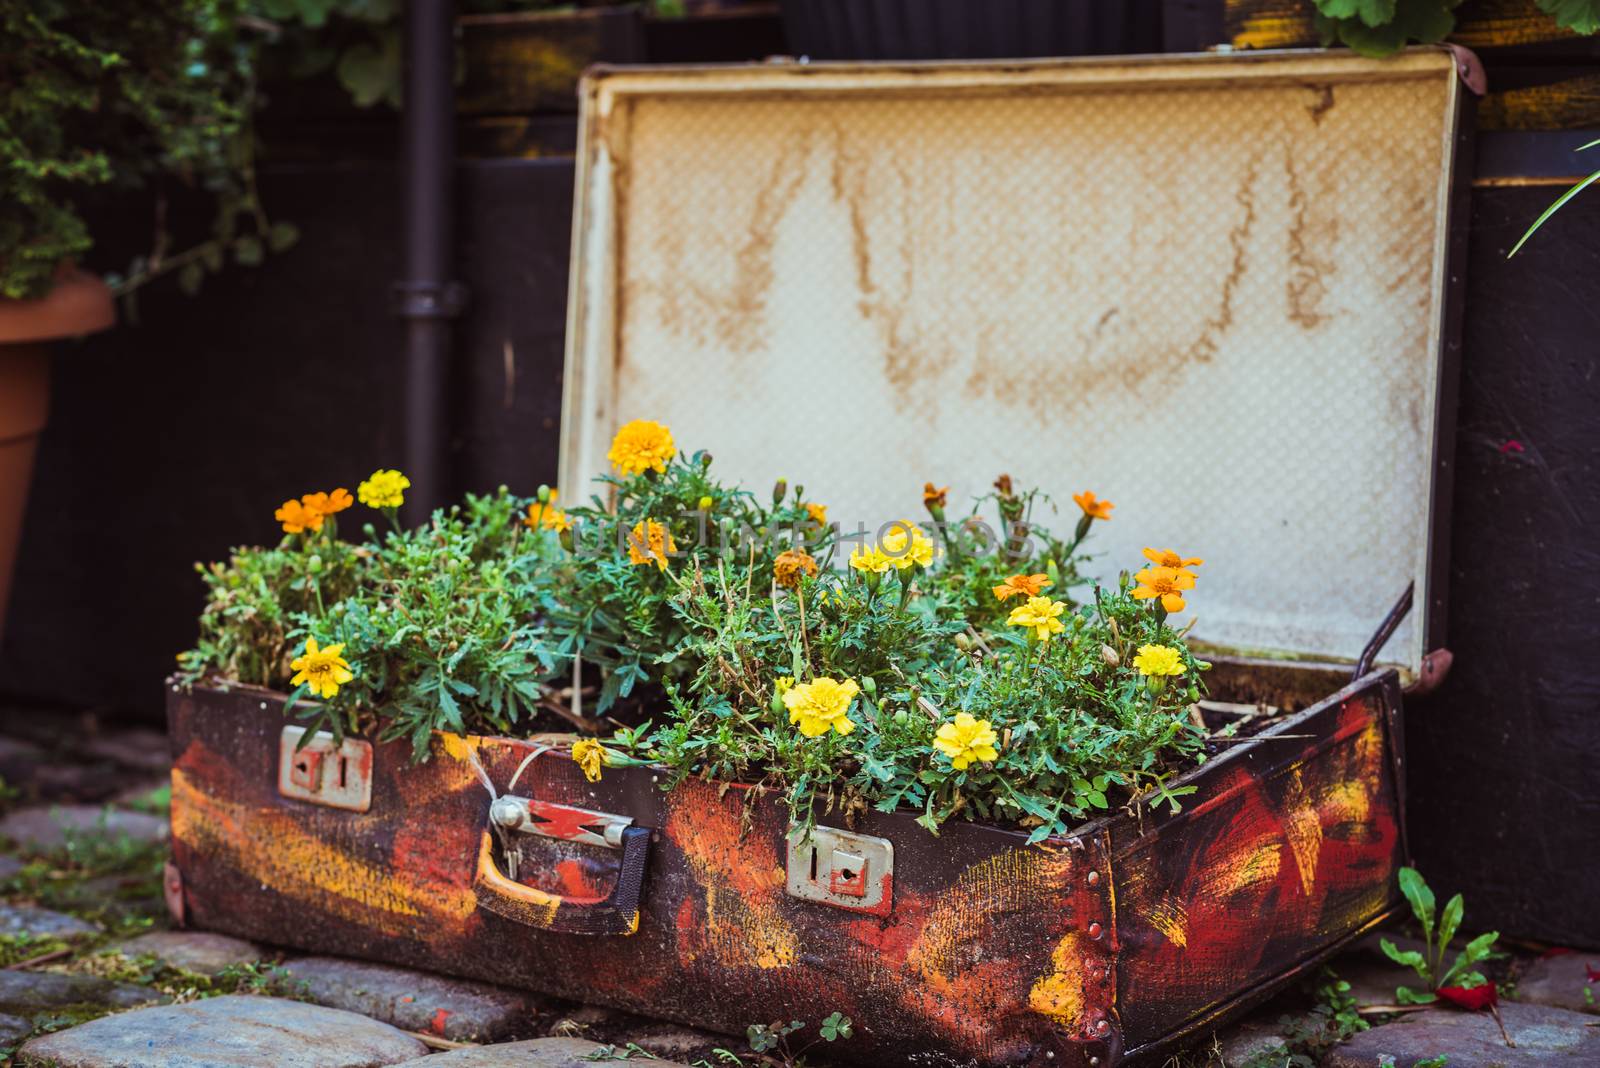 Open old suitcase on the pavement with flowers that grow inside